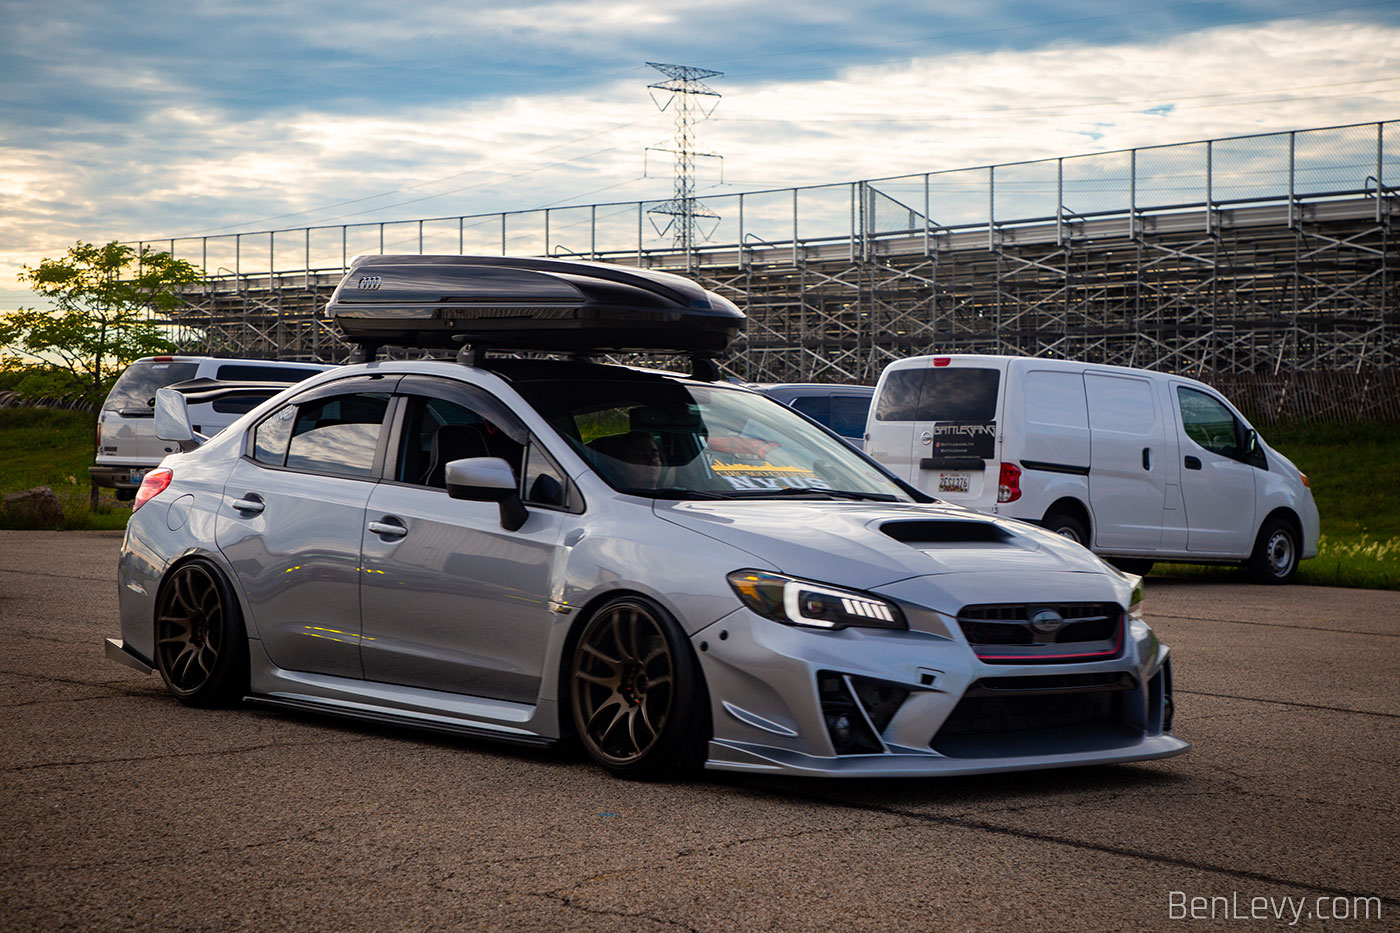 Silver WRX on airbags leaving Slammedenuff Chicago